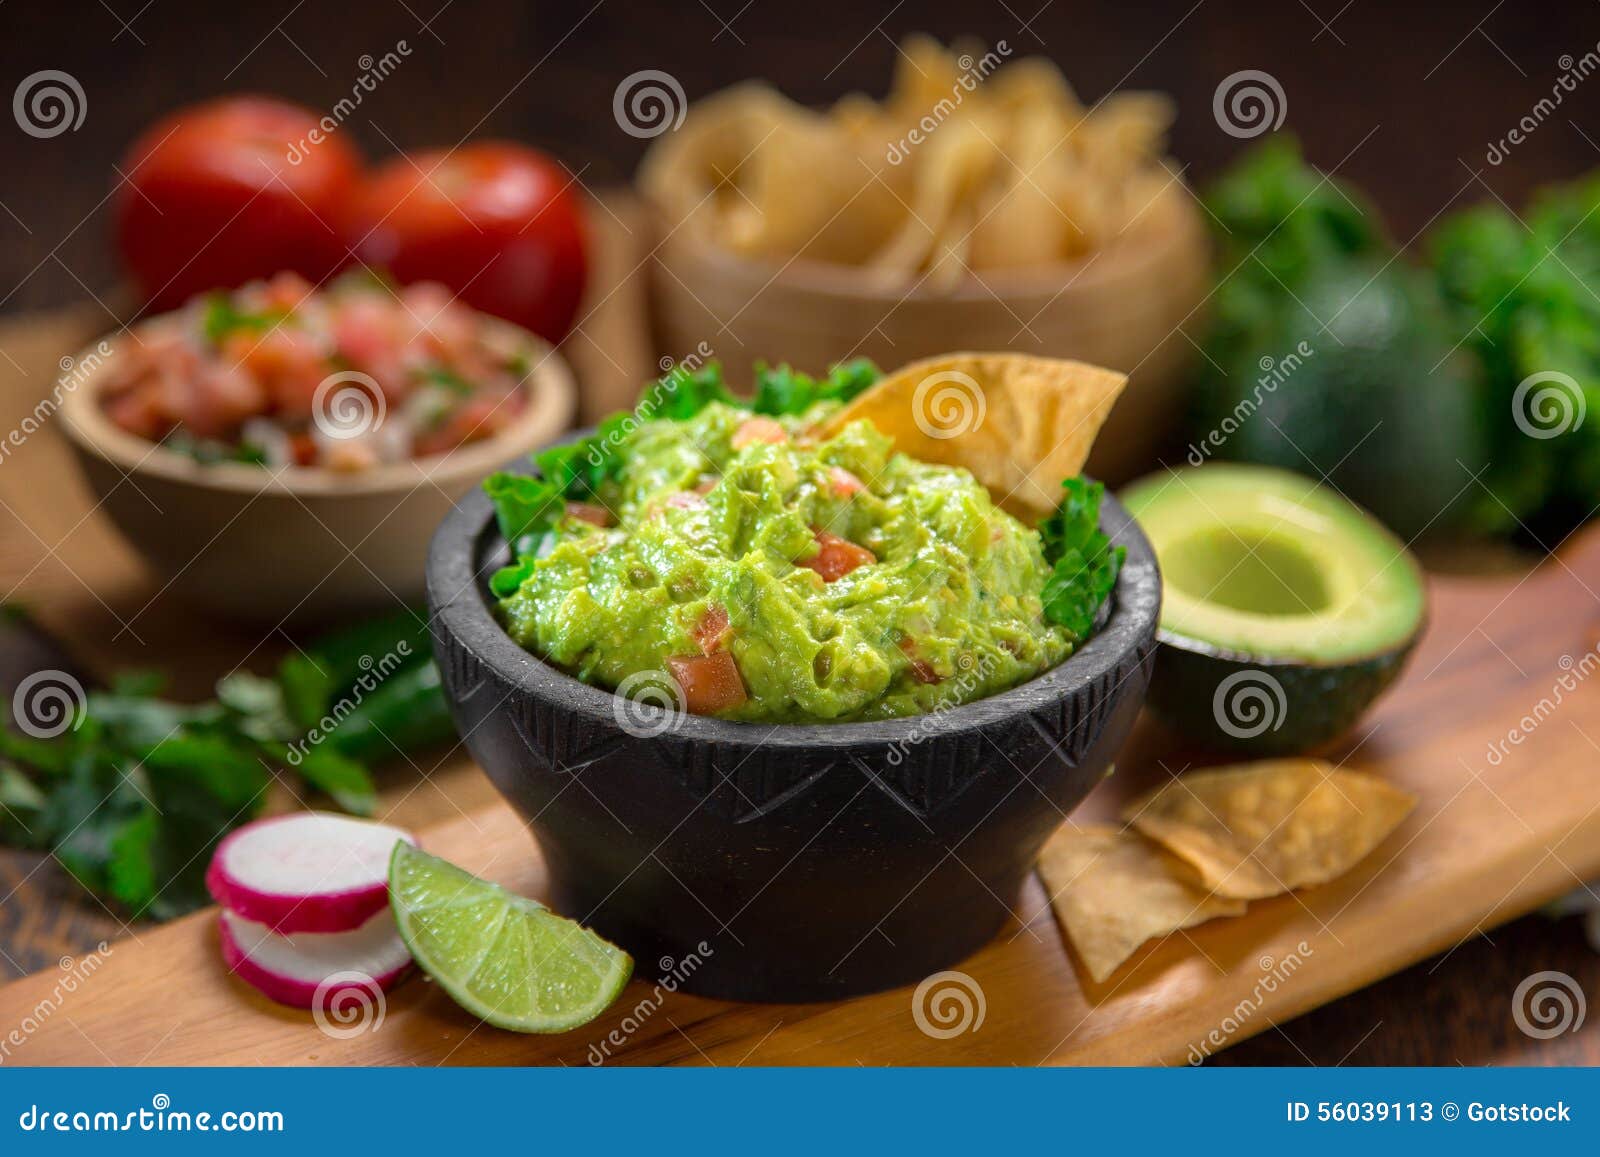 a delicious bowl of guacamole next to fresh ingredients on a table with tortilla chips and salsa